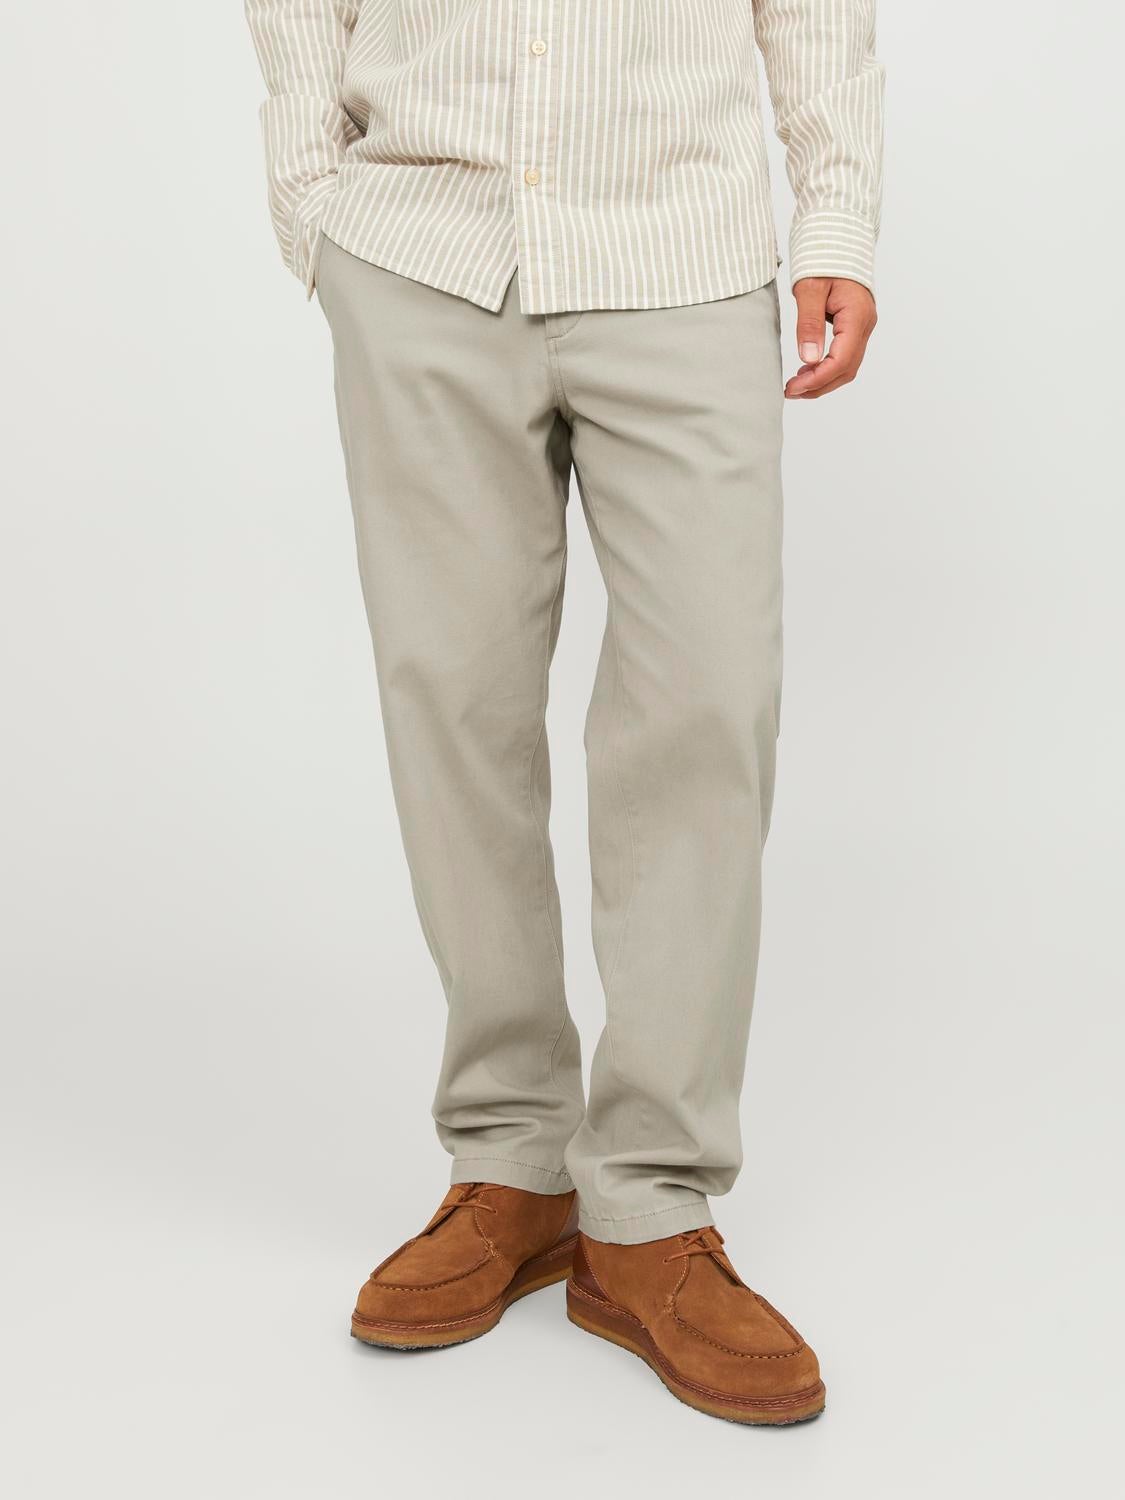 Vans Authentic Relaxed Fit Chinos | Nordstrom